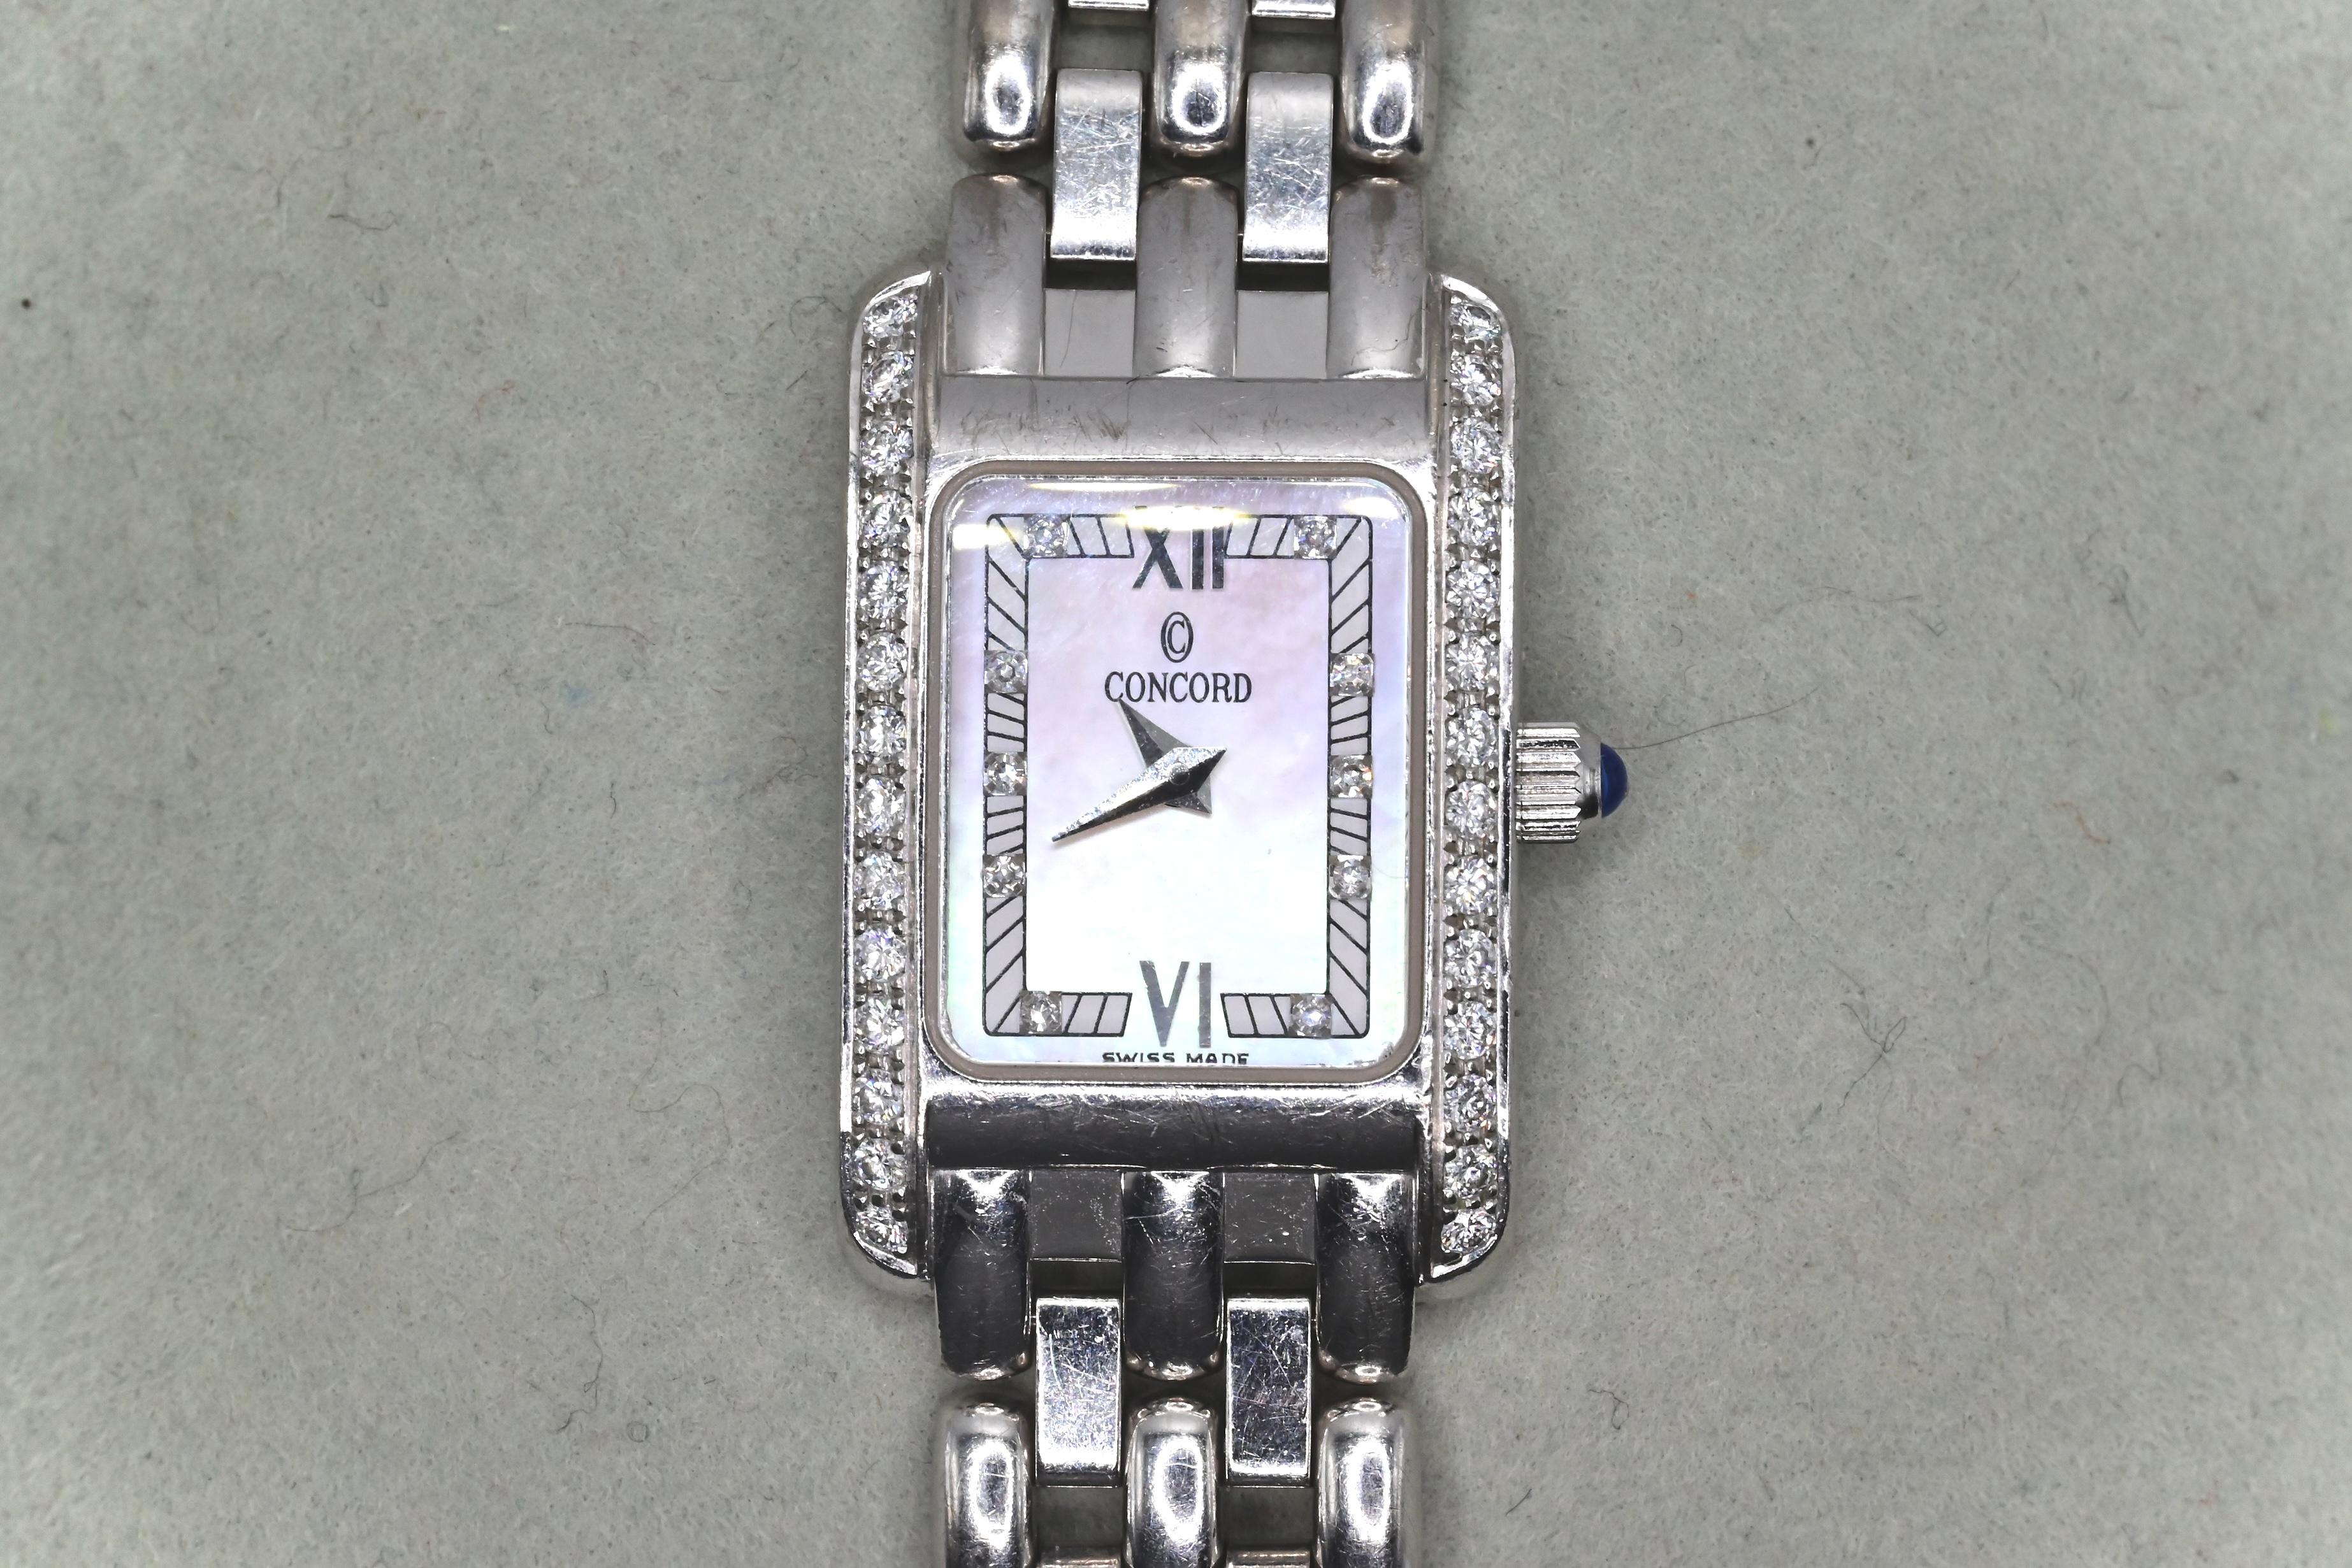 This is a classic pre-owned Concord Veneto ladies wristwatch made with 18k white gold, gorgeous round cut diamonds, and a single blue sapphire on the crown. There’s 28 diamonds encrusted around the bezel, and 10 diamonds placed on certain time